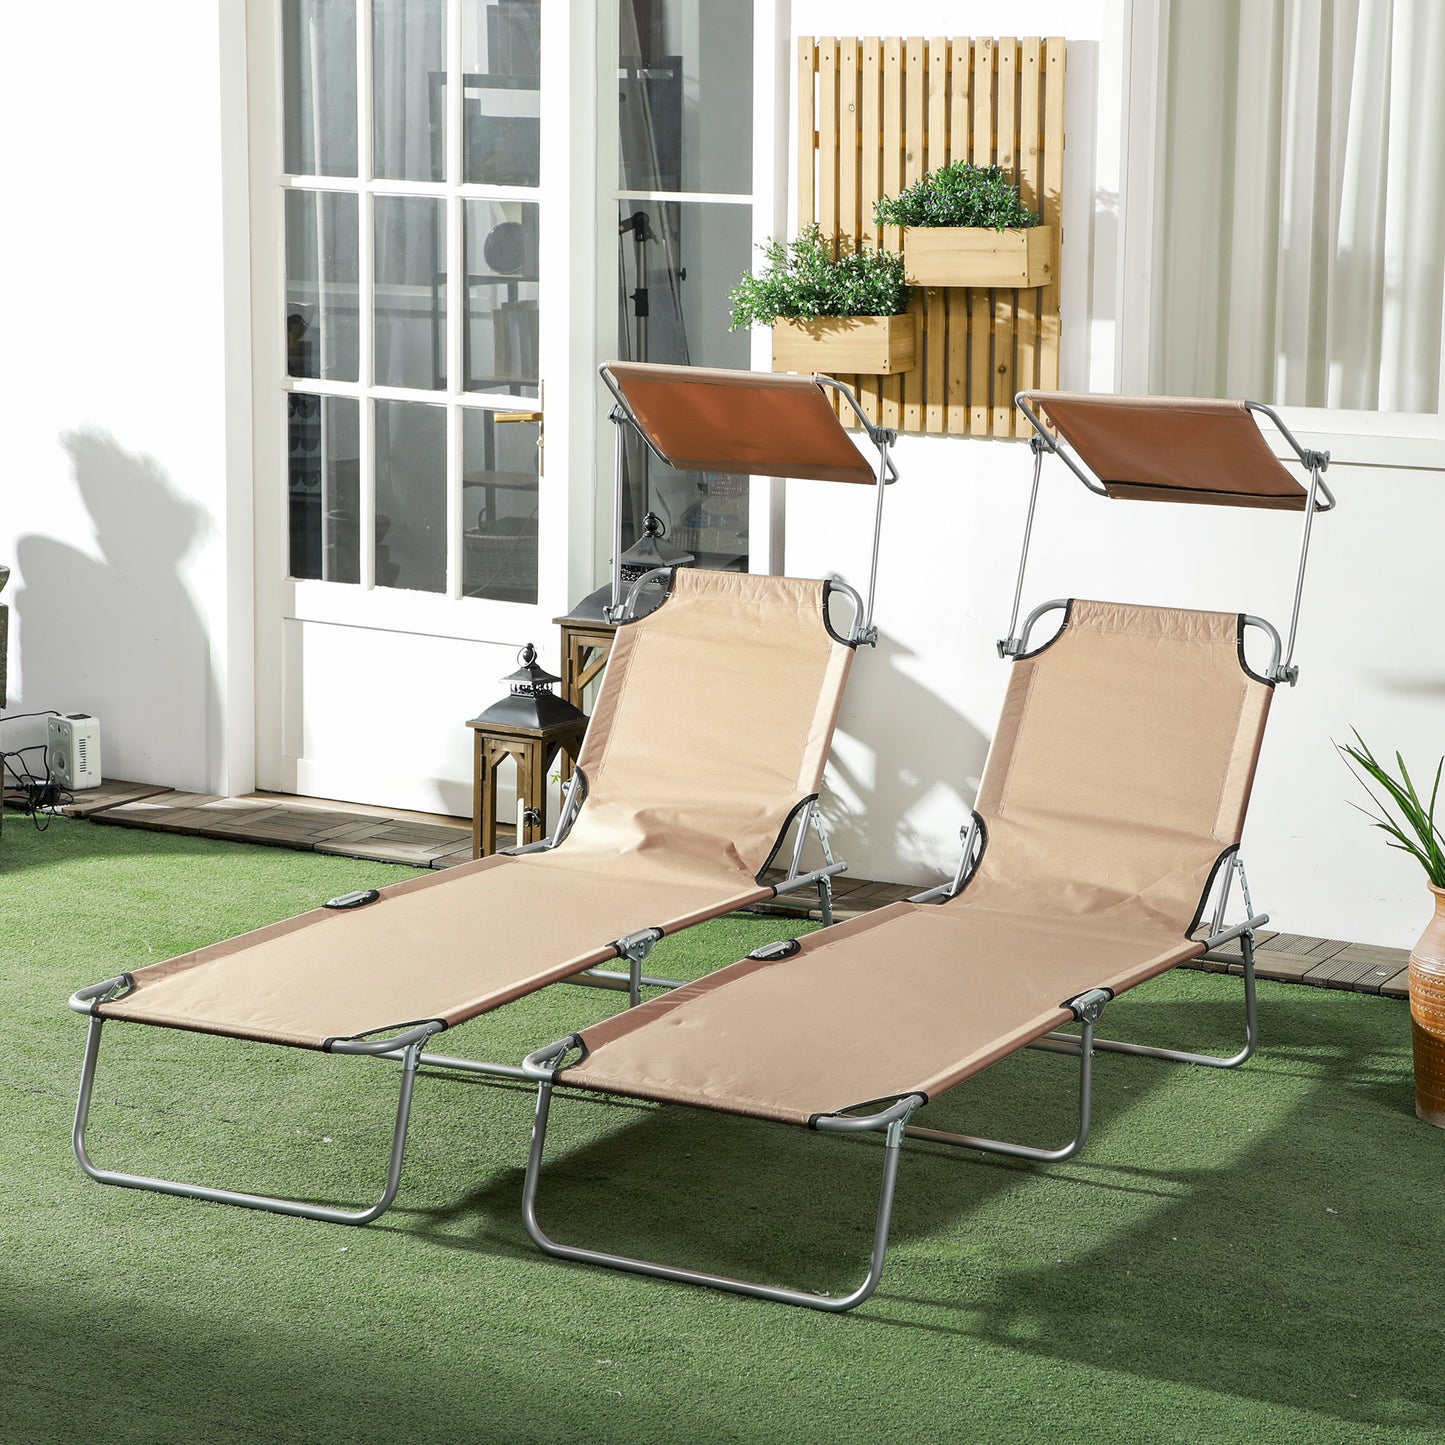 Outsunny 2-Piece Foldable Sun Lounger Set with Shade - Brown